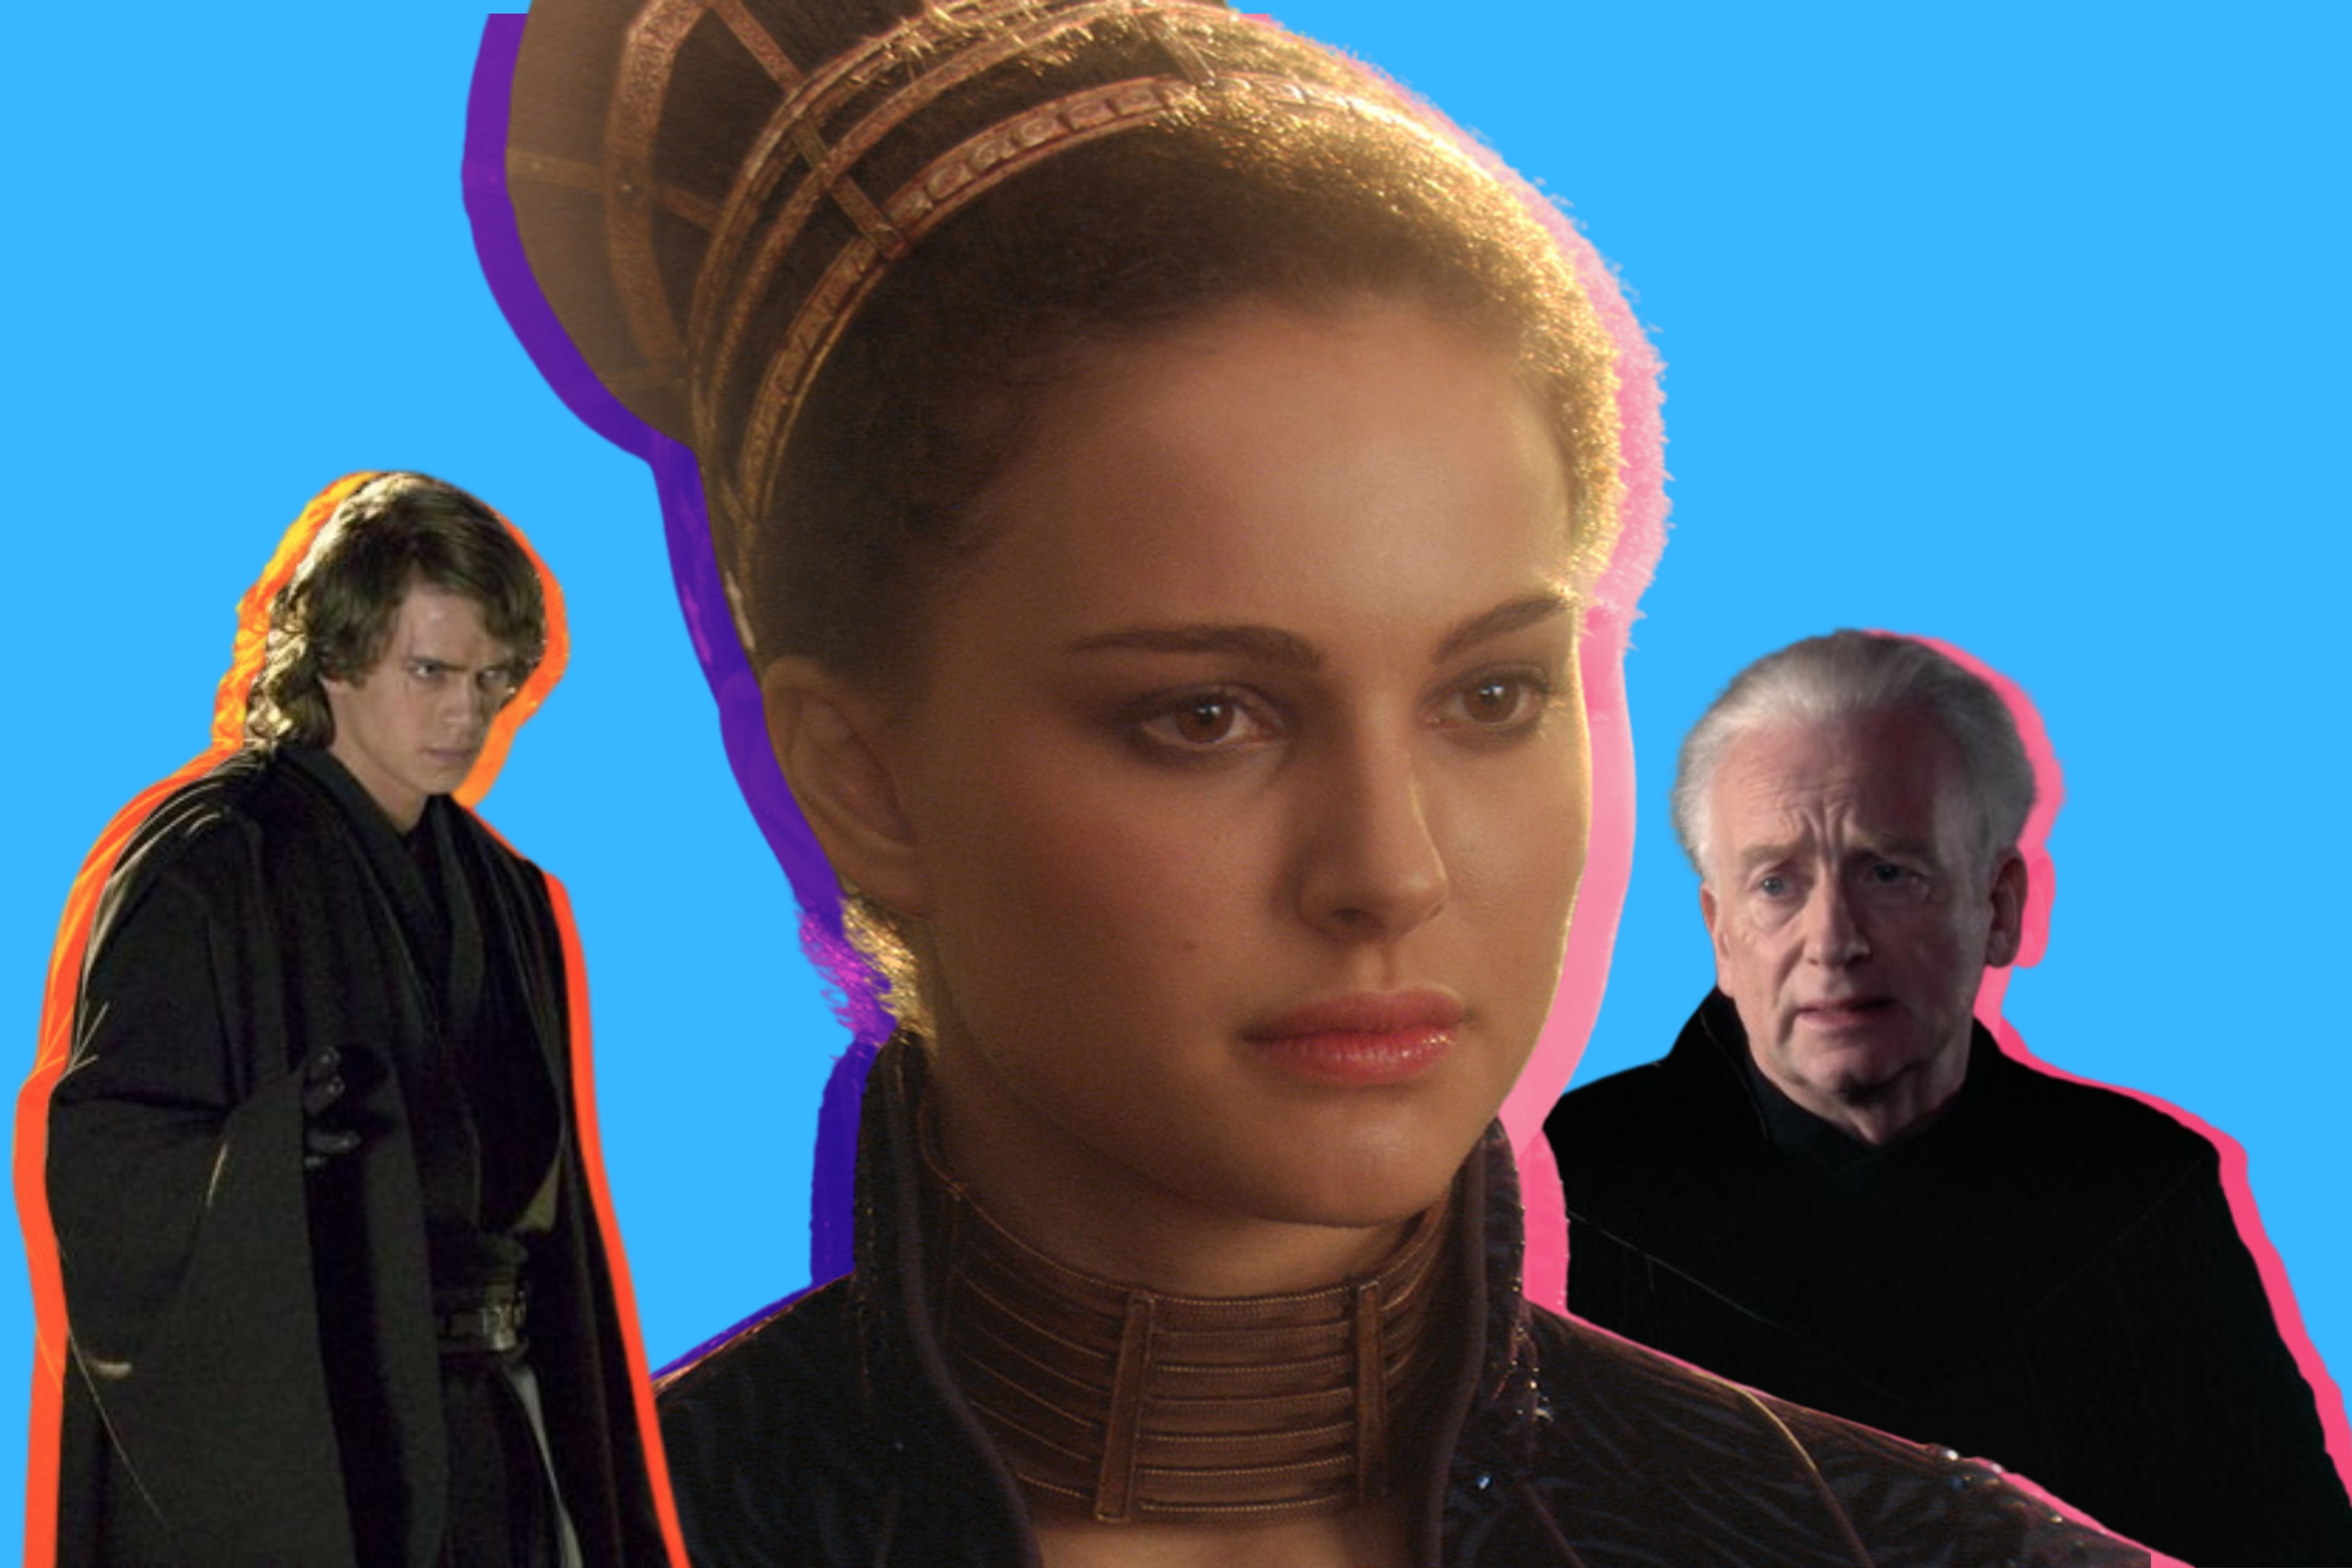 5 iconic Star Wars hairstyles